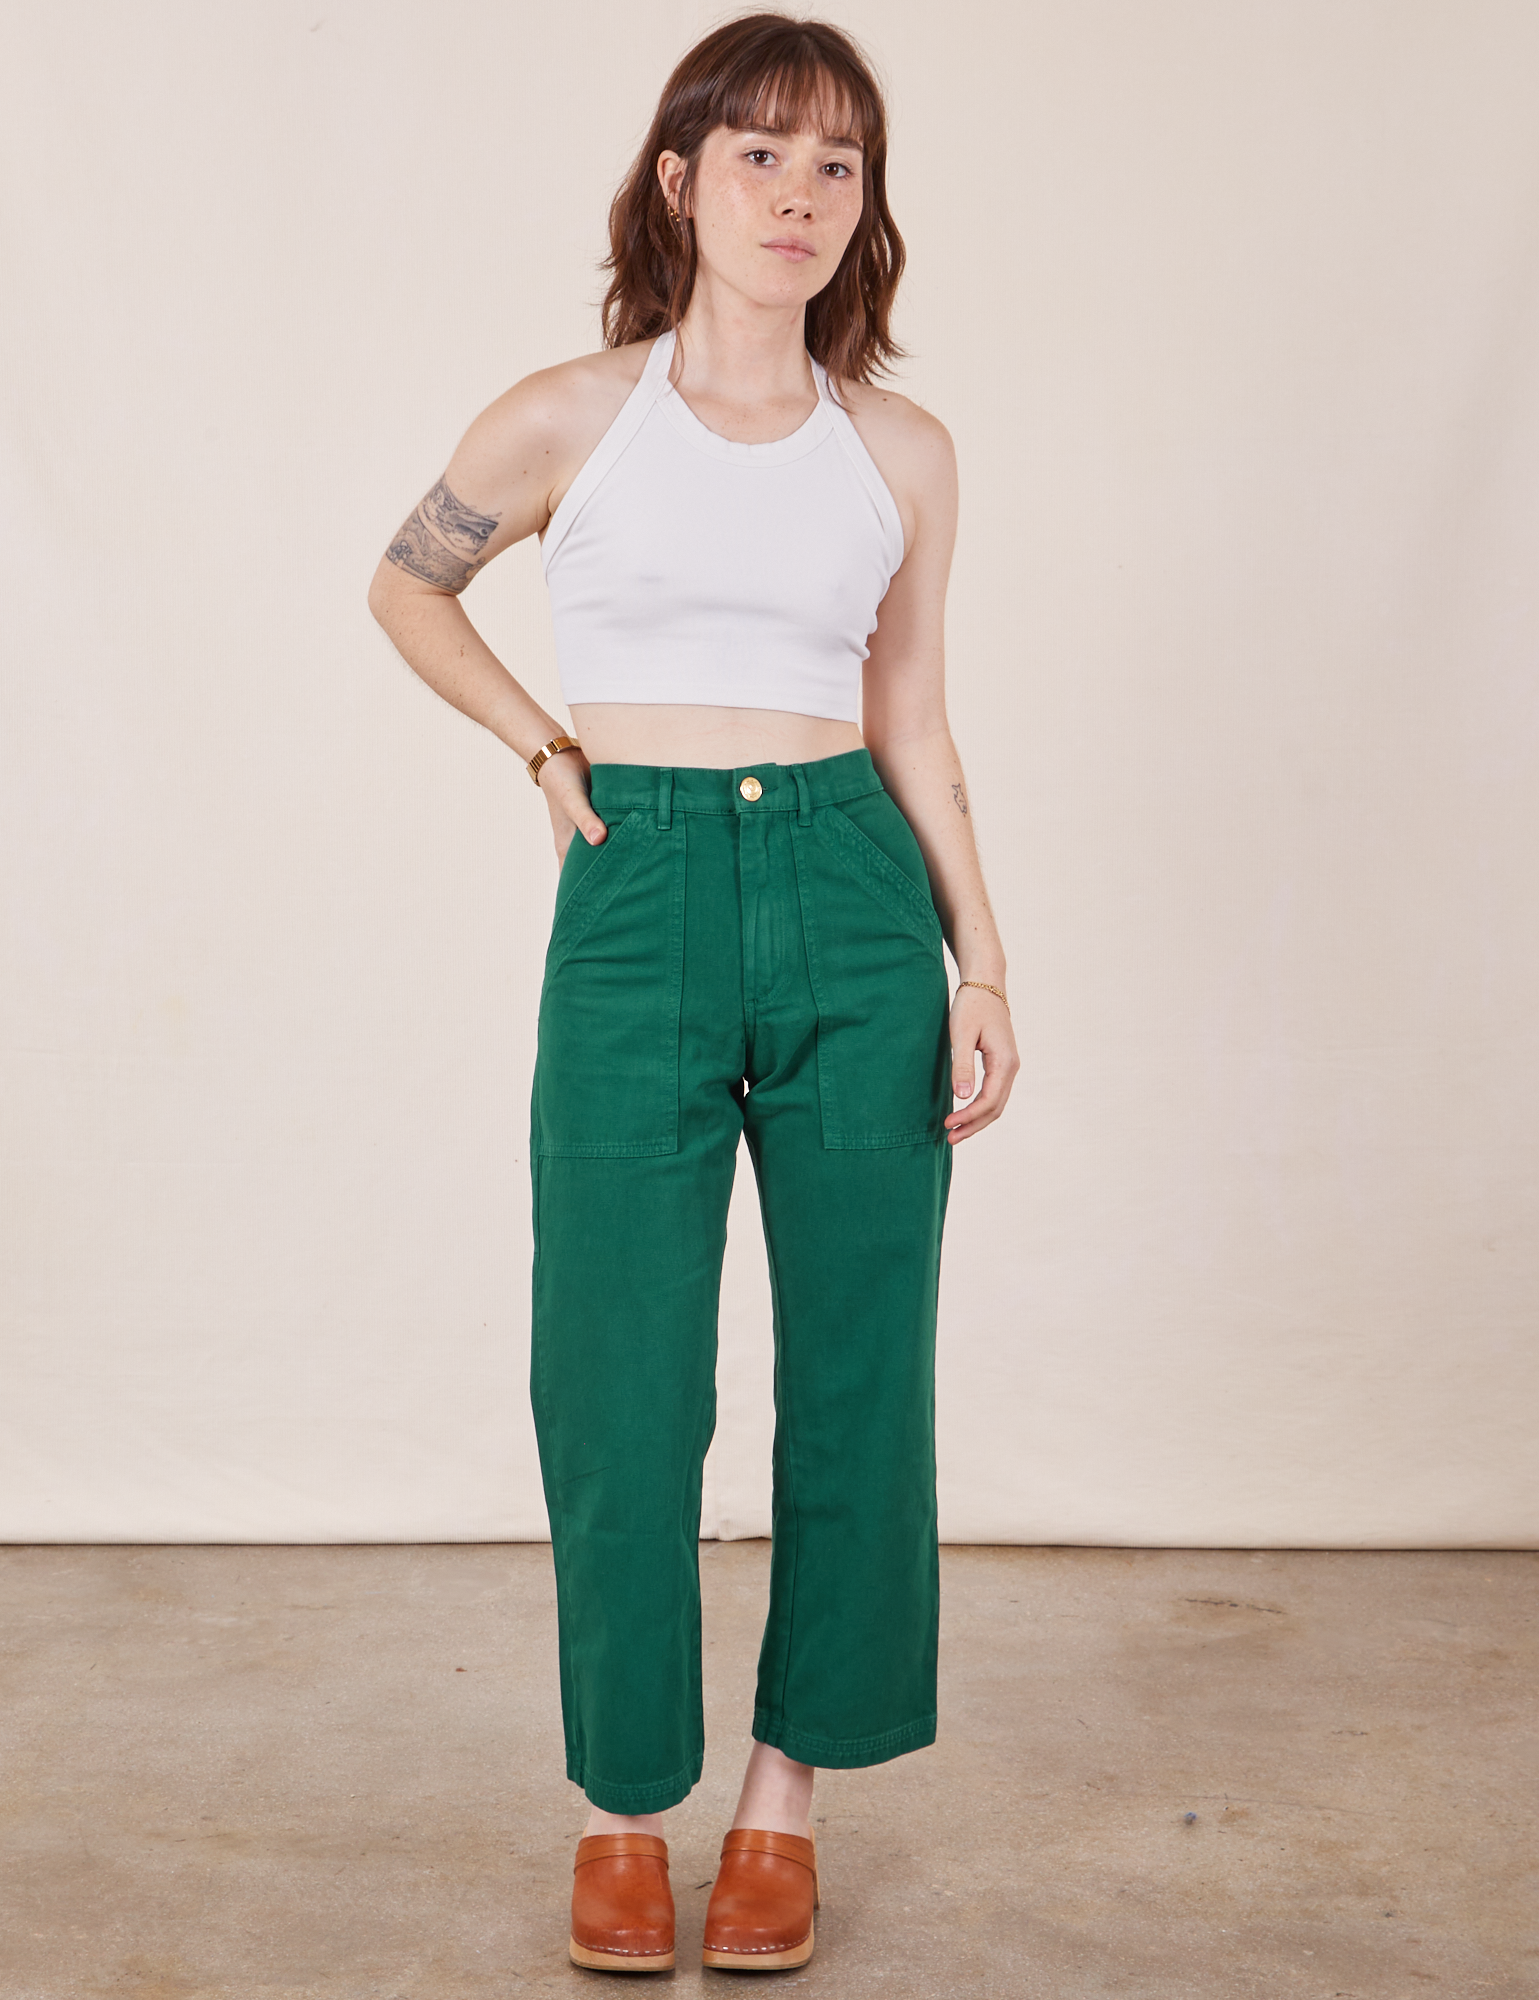 Hana is 5&#39;3&quot; and wearing XXS Petite Work Pants in Hunter Green paired with vintage off-white Halter Top